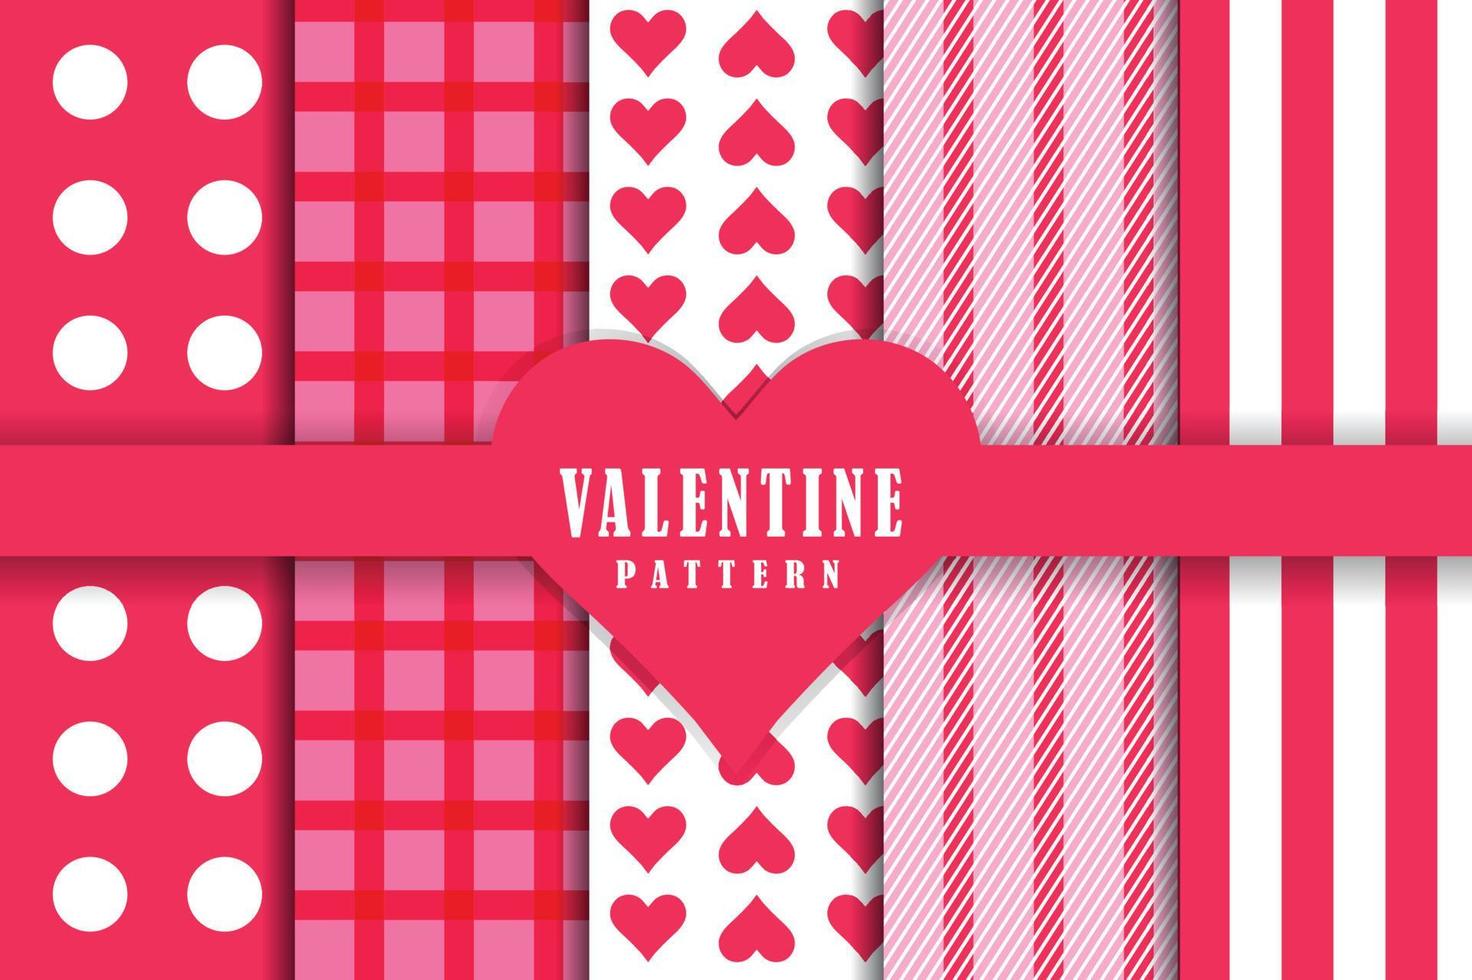 Flat design valentines day pattern collection vector